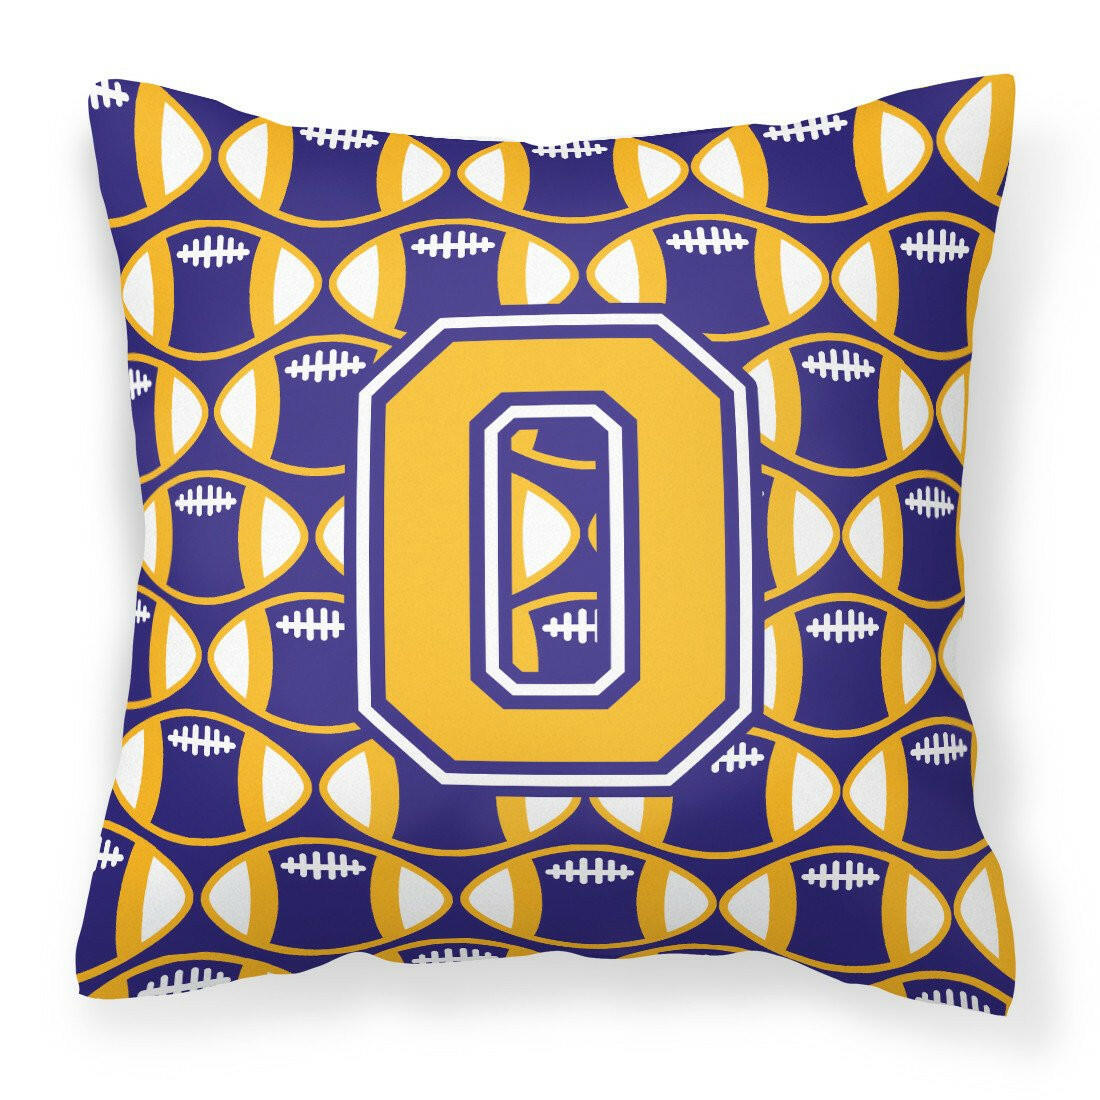 Letter O Football Purple and Gold Fabric Decorative Pillow CJ1064-OPW1414 by Caroline's Treasures